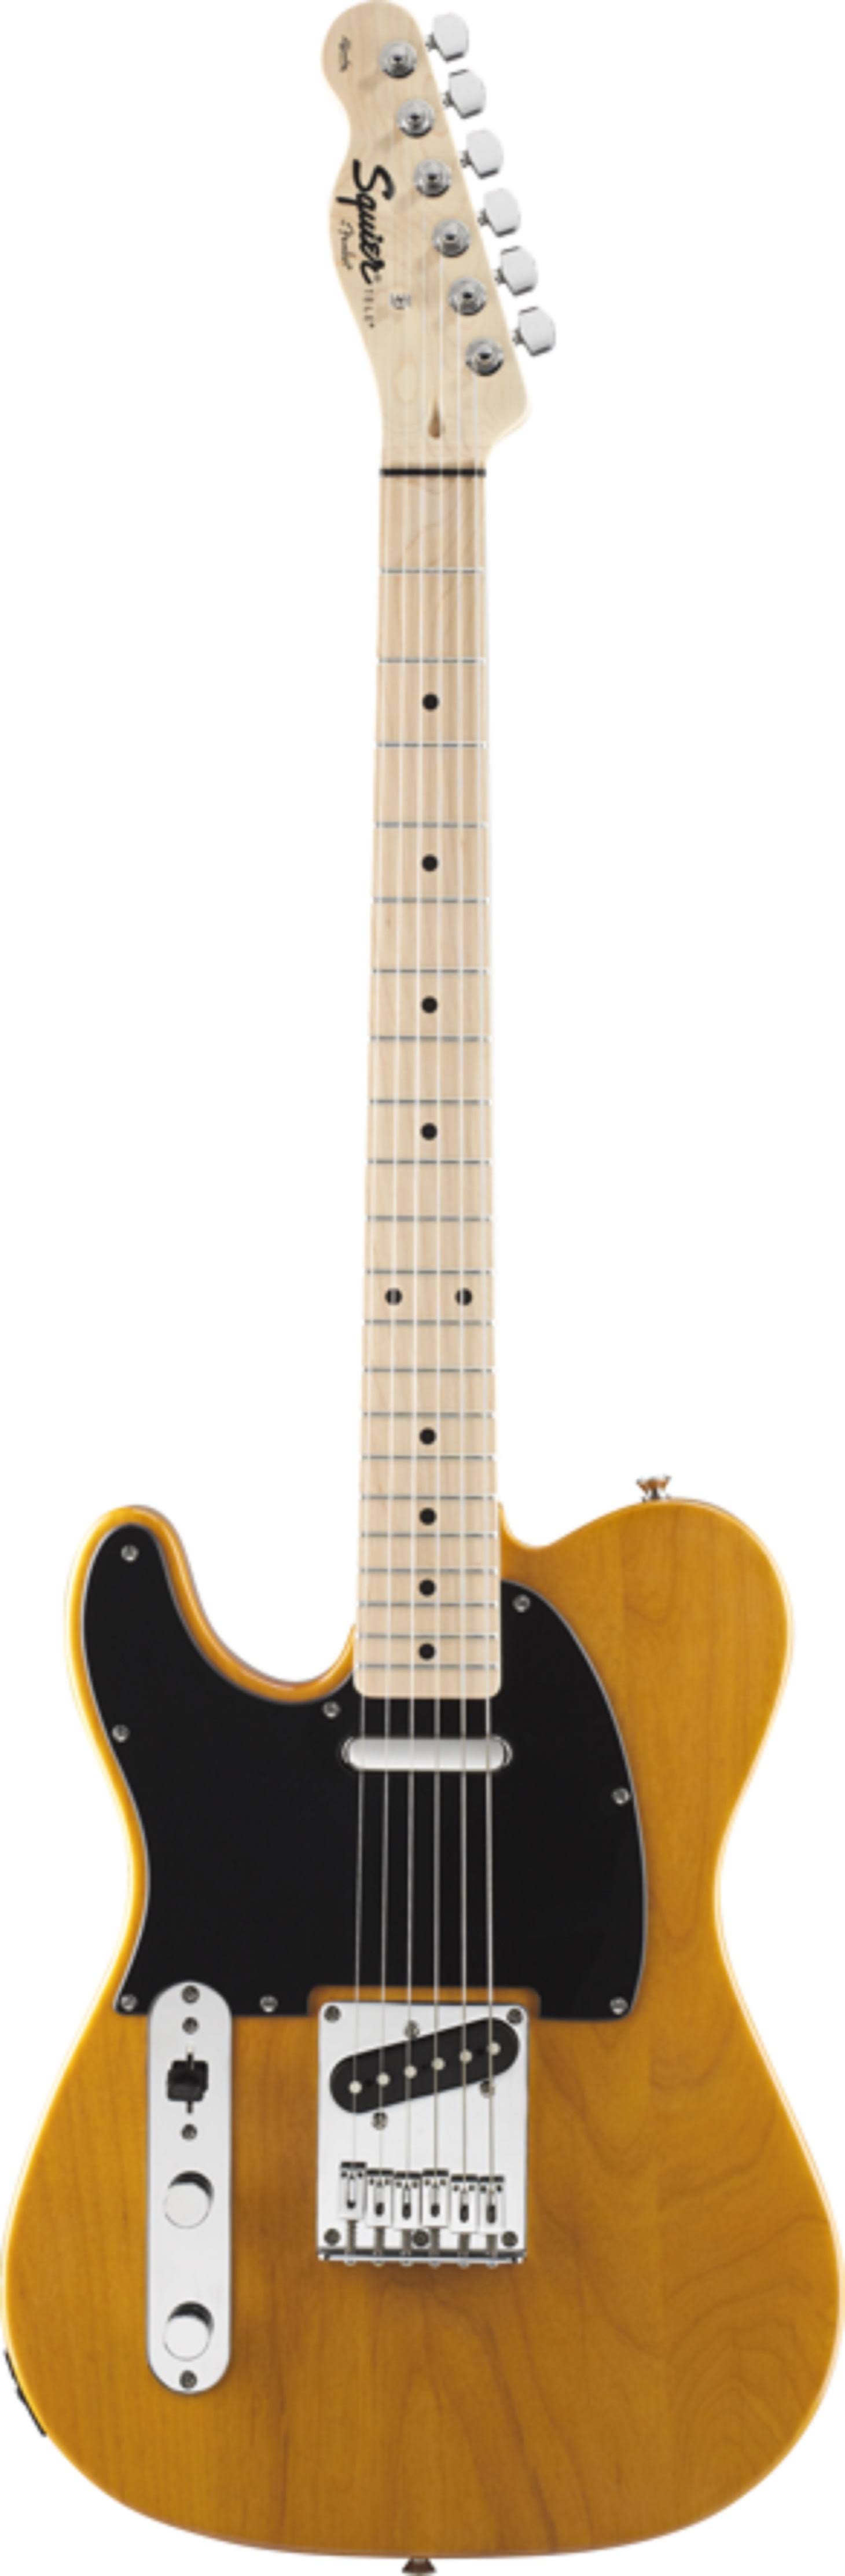 Squier Affinity Telecaster Left-Handed Electric Guitar, Maple Fingerboard Butterscotch Blonde